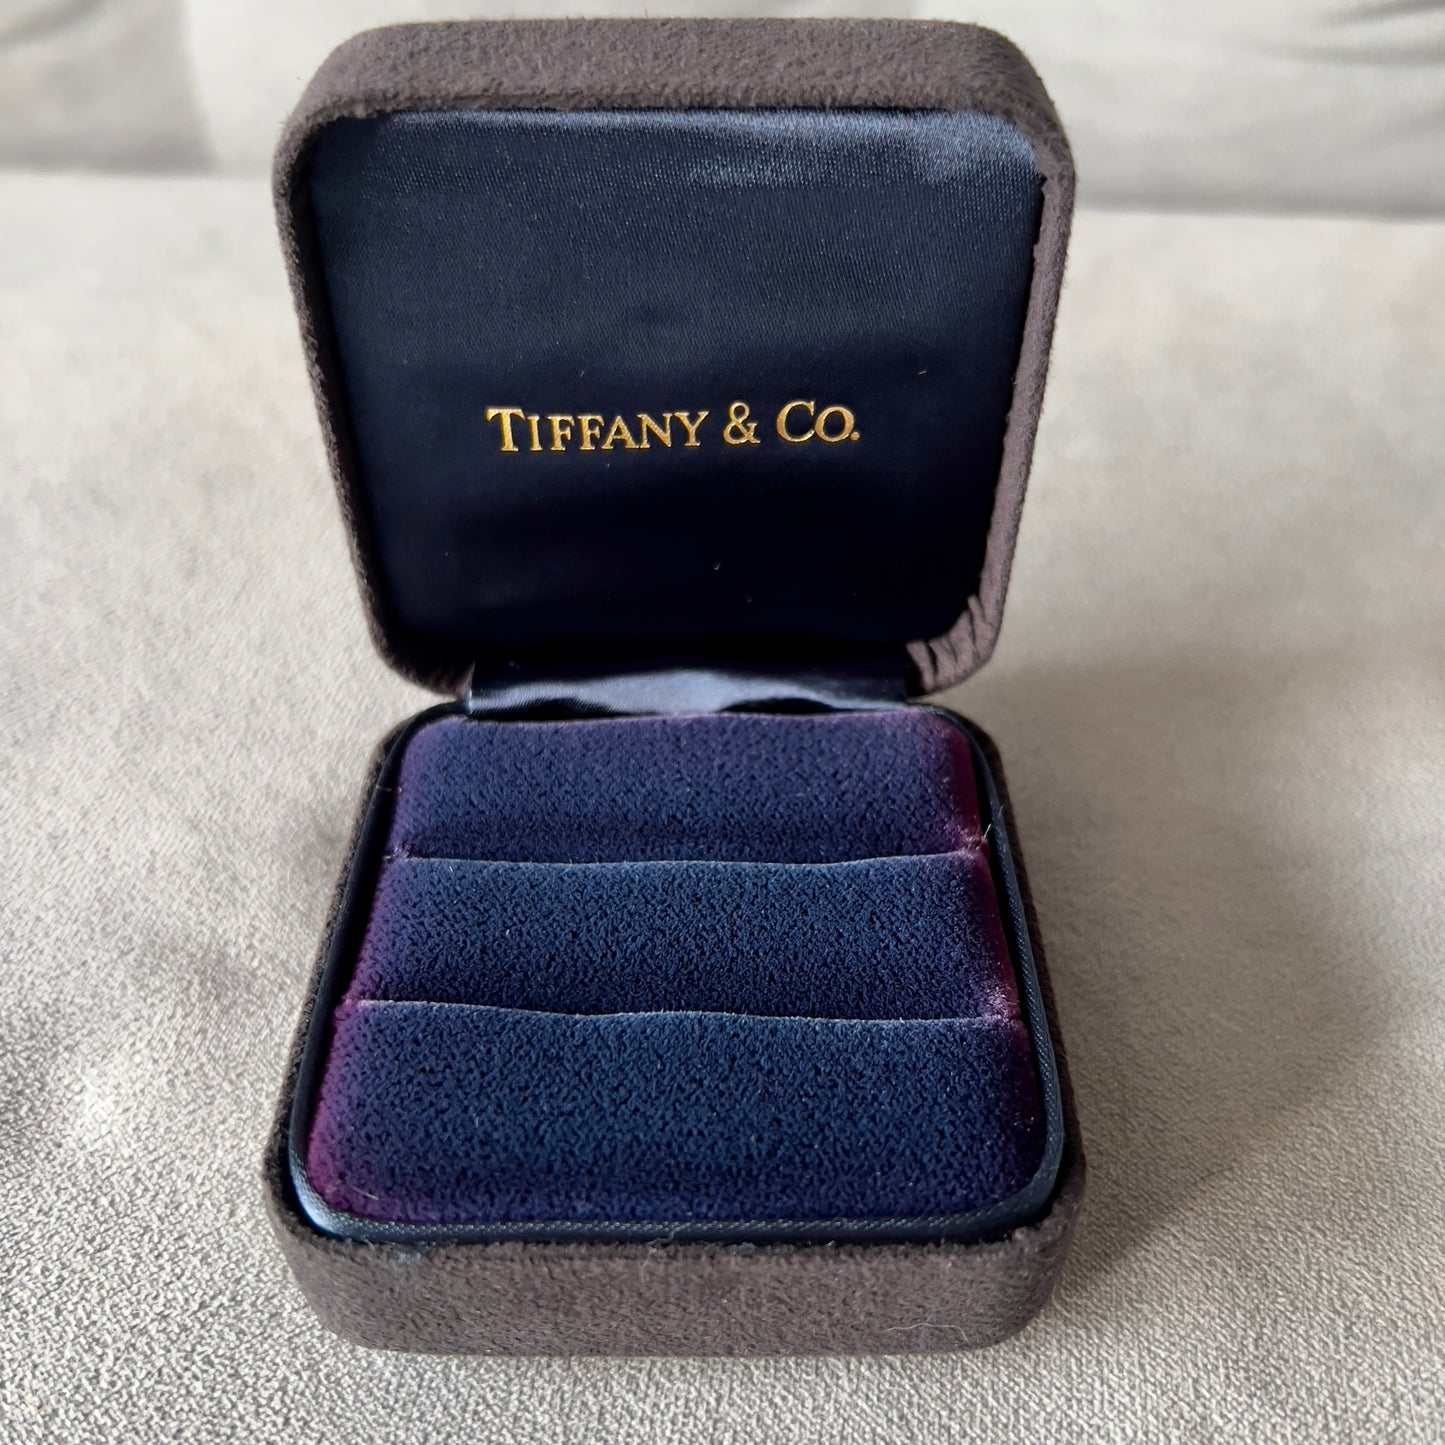 TIFFANY & CO. Double Alliance Ring Box 2.75x2.75x1.5 inches